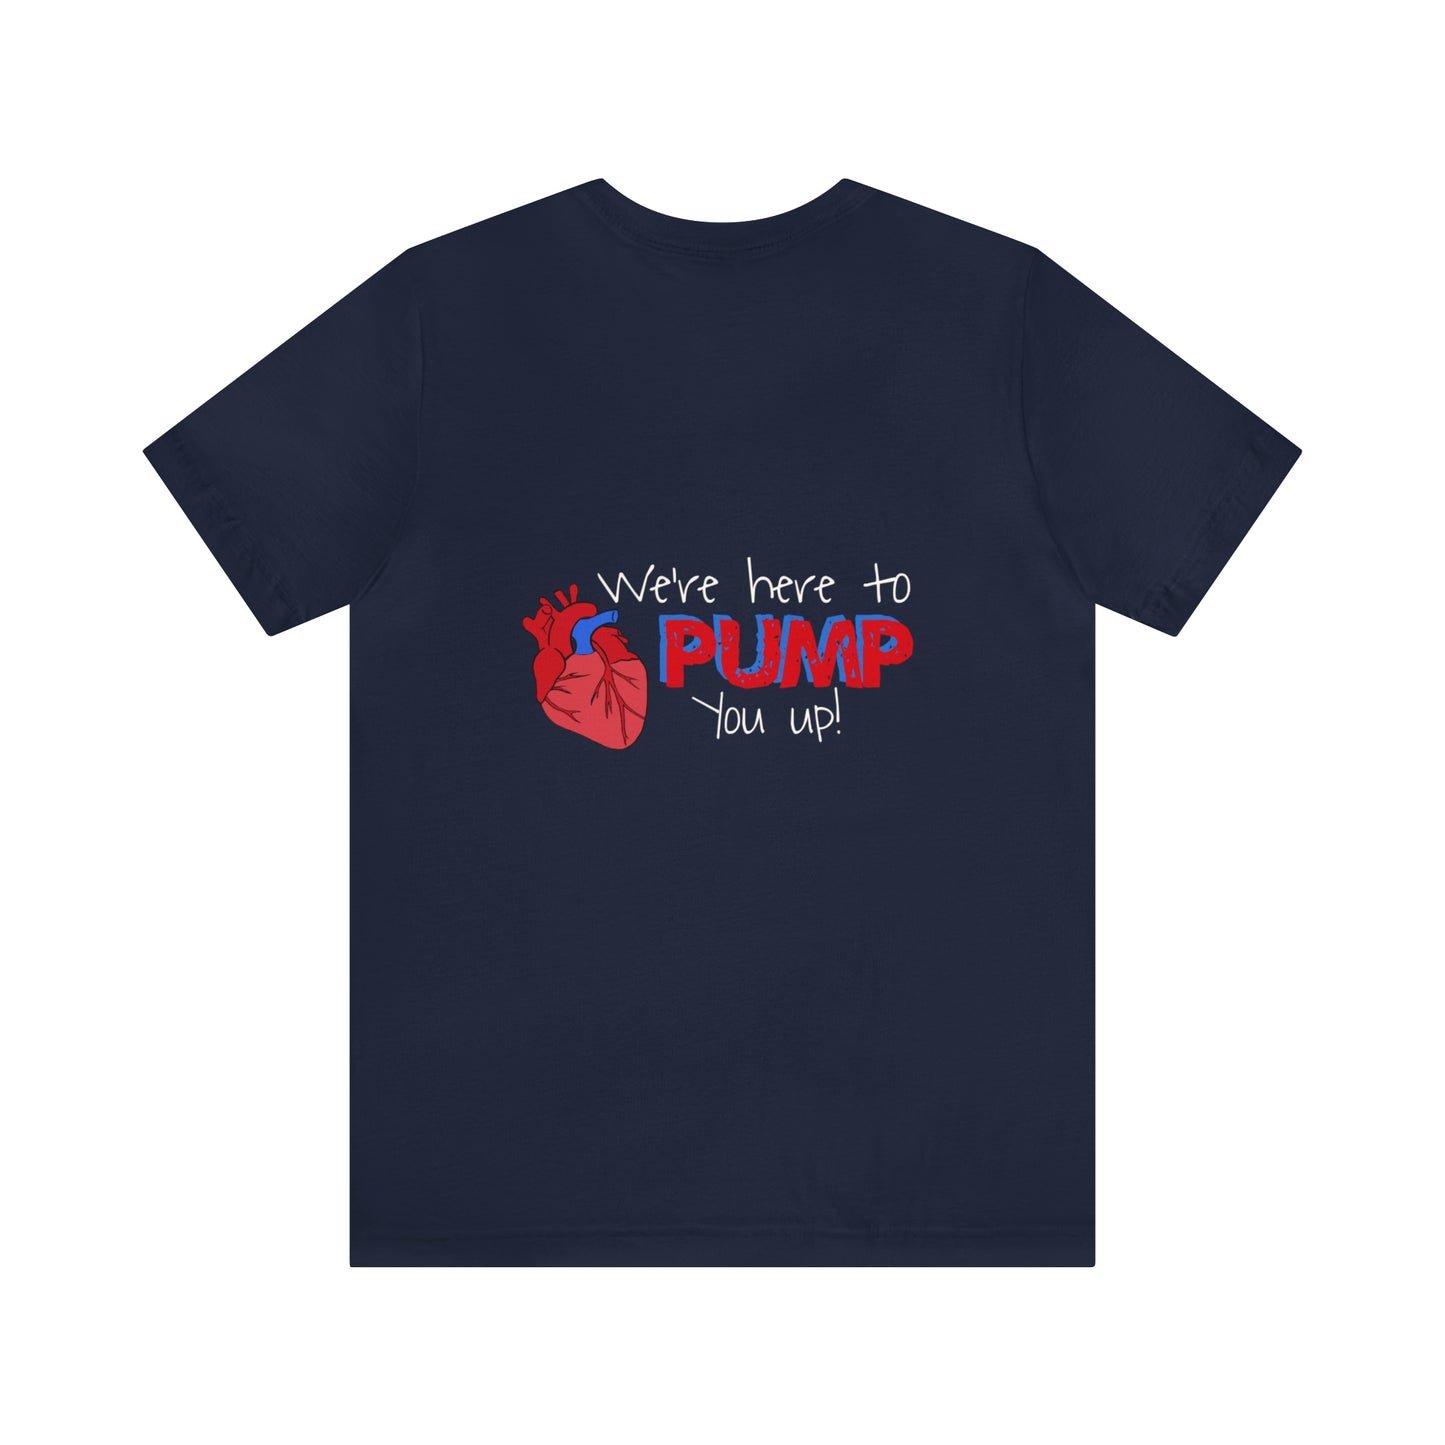 Heart Failure ICU-Here to pump you up Unisex Jersey Short Sleeve Tee